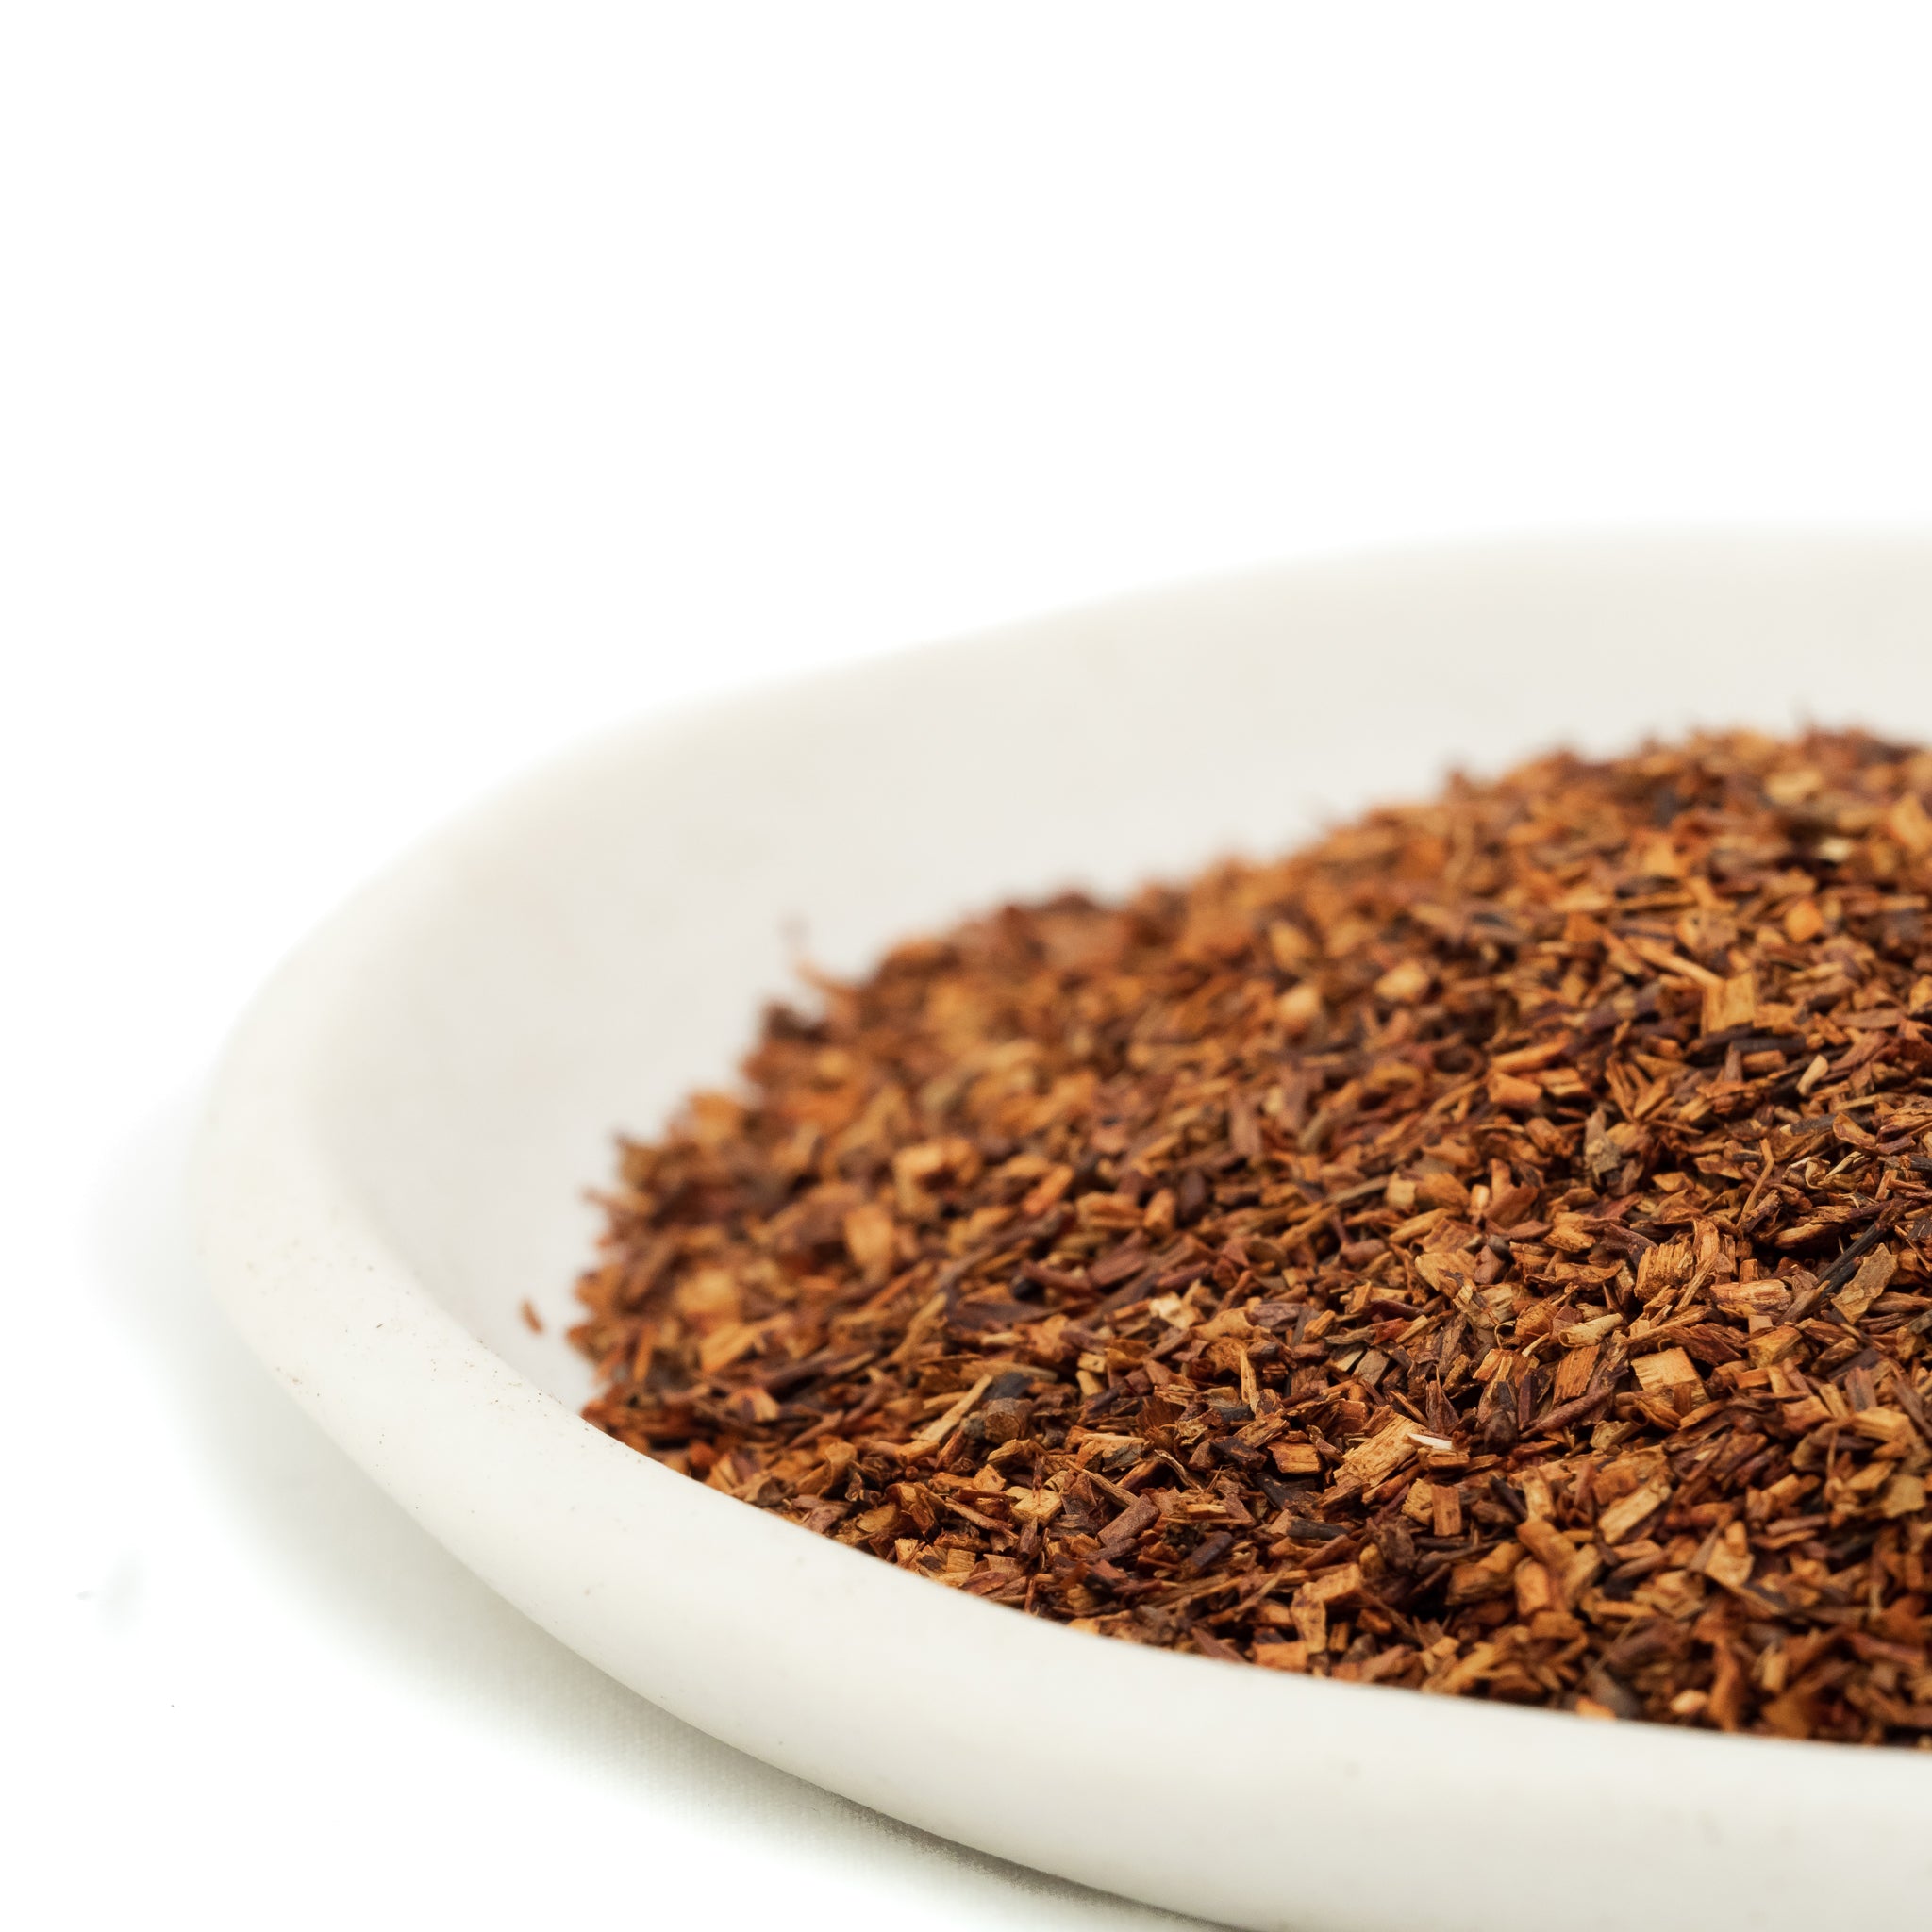 Smooth Organic South African Rooibos